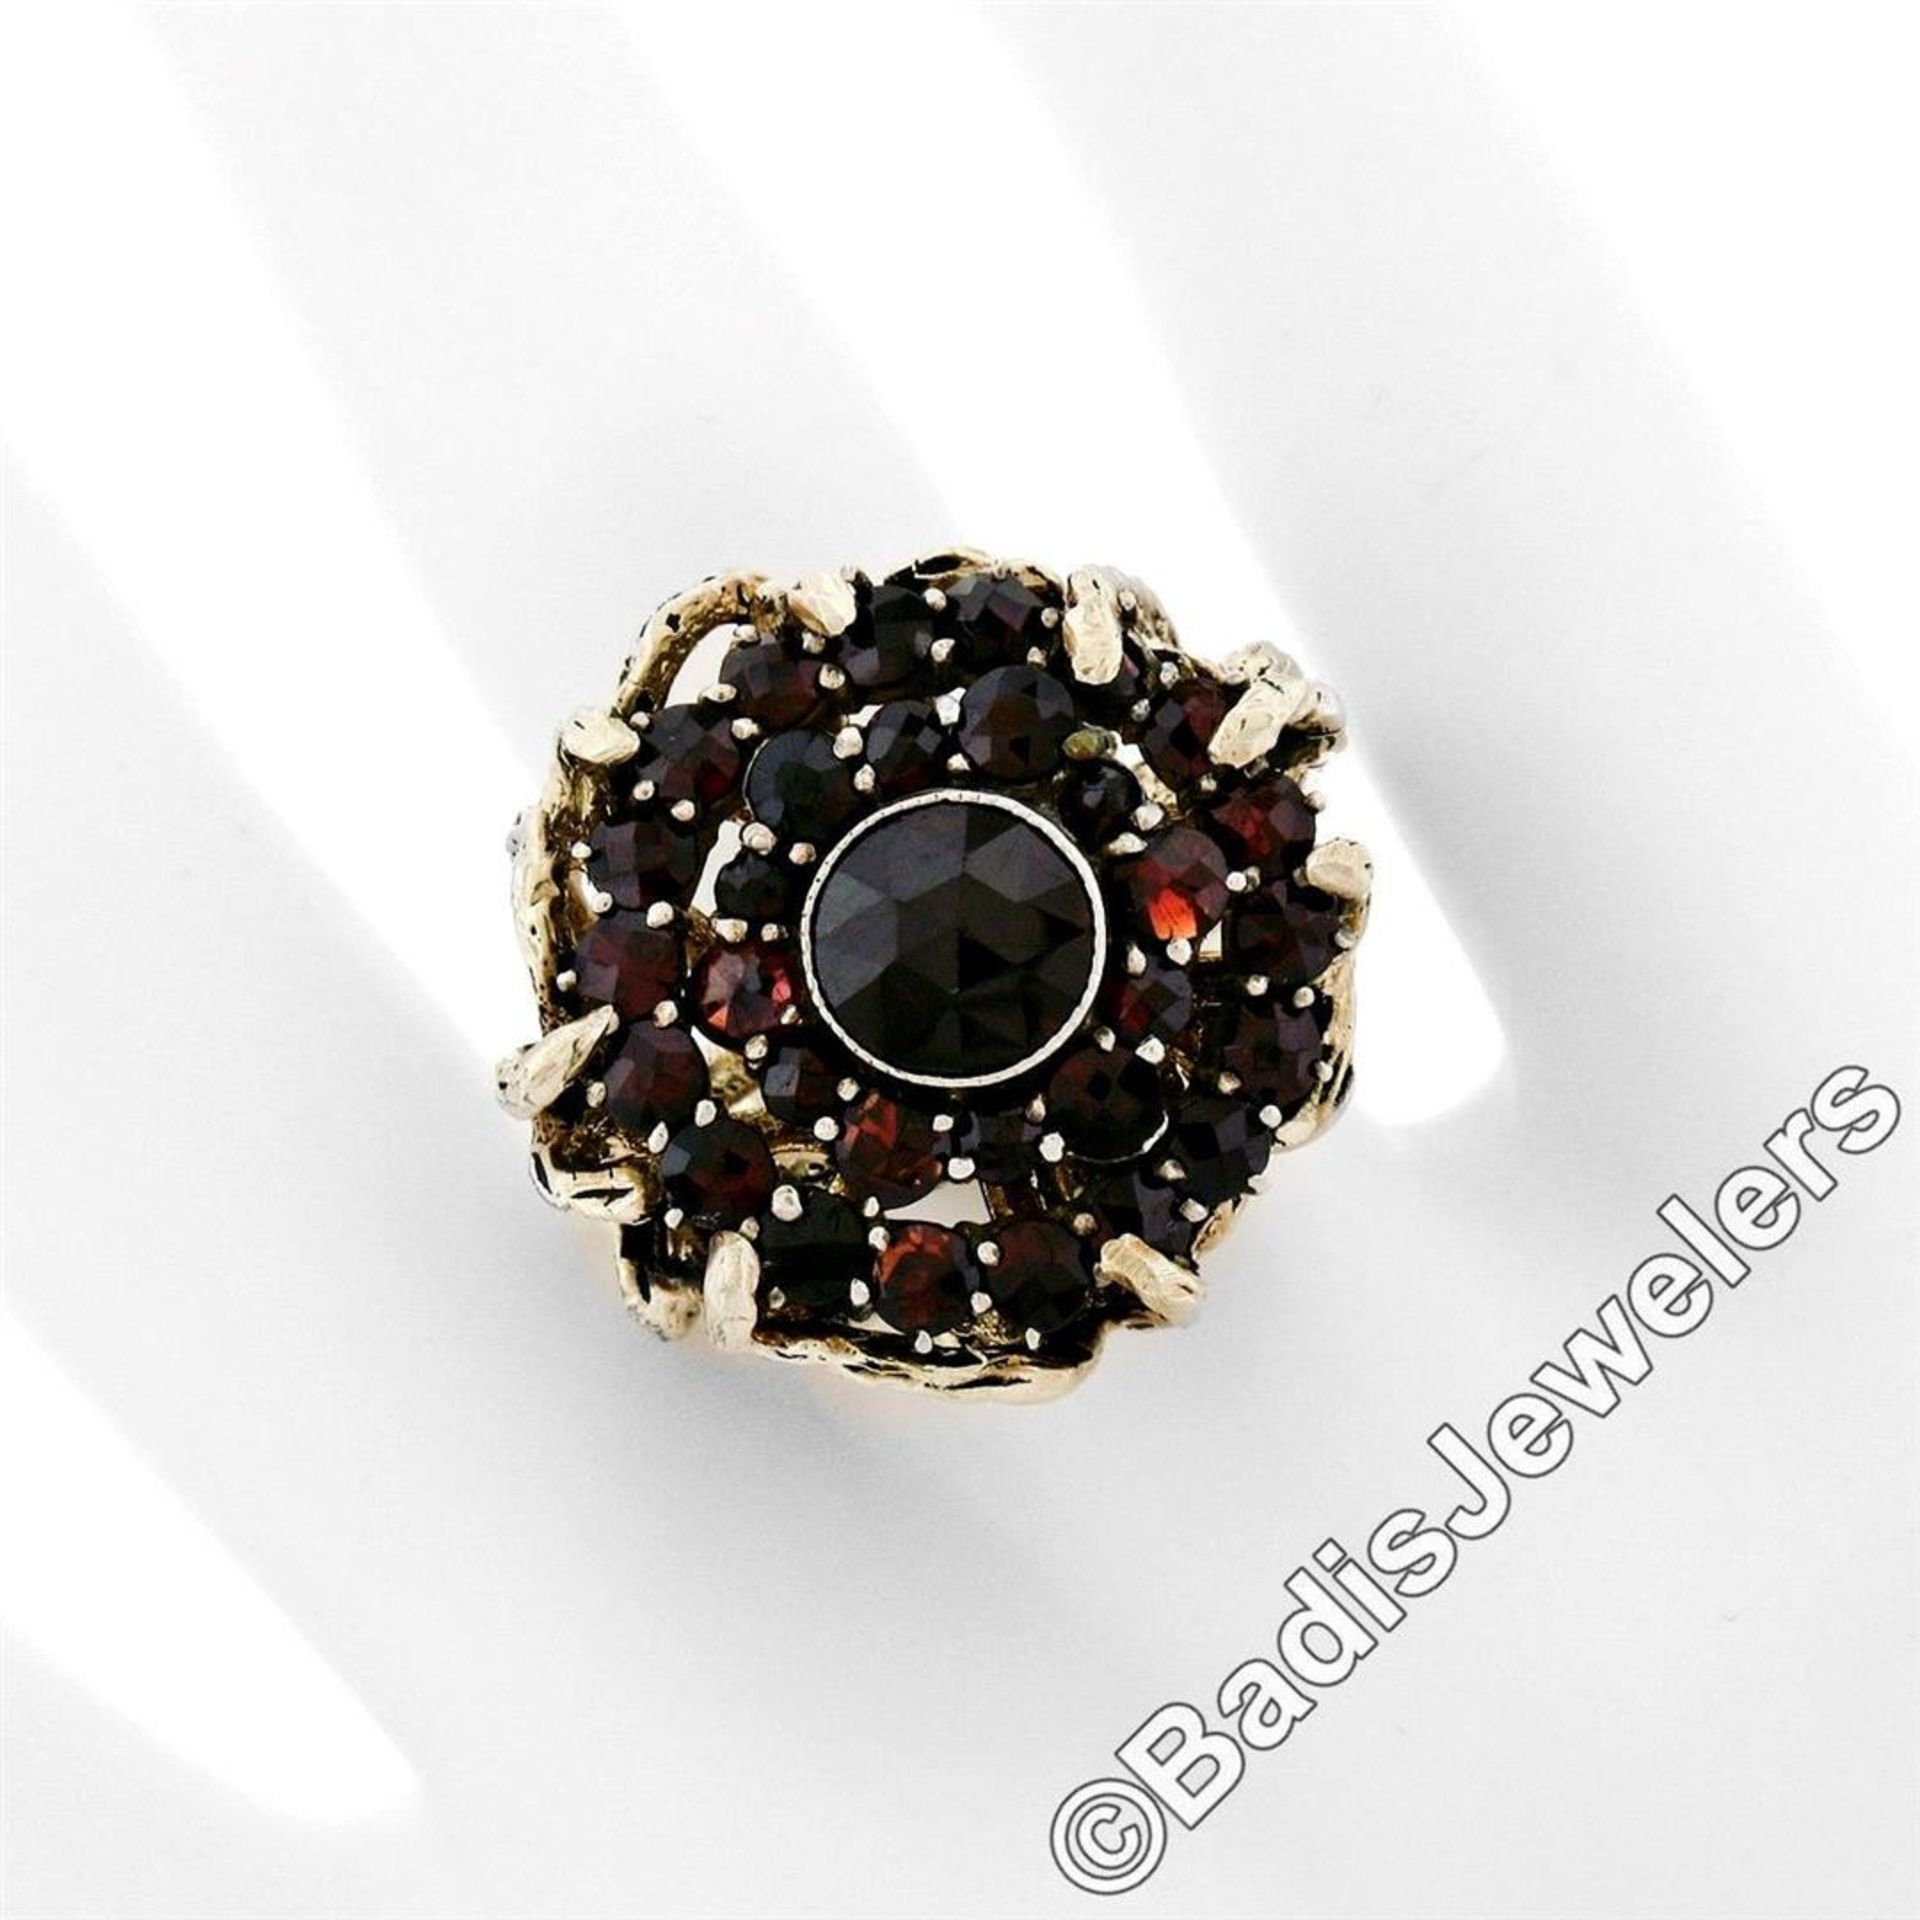 Vintage 14kt Yellow Gold and Silver Top Old Cut Garnet Cluster Ring - Image 4 of 9